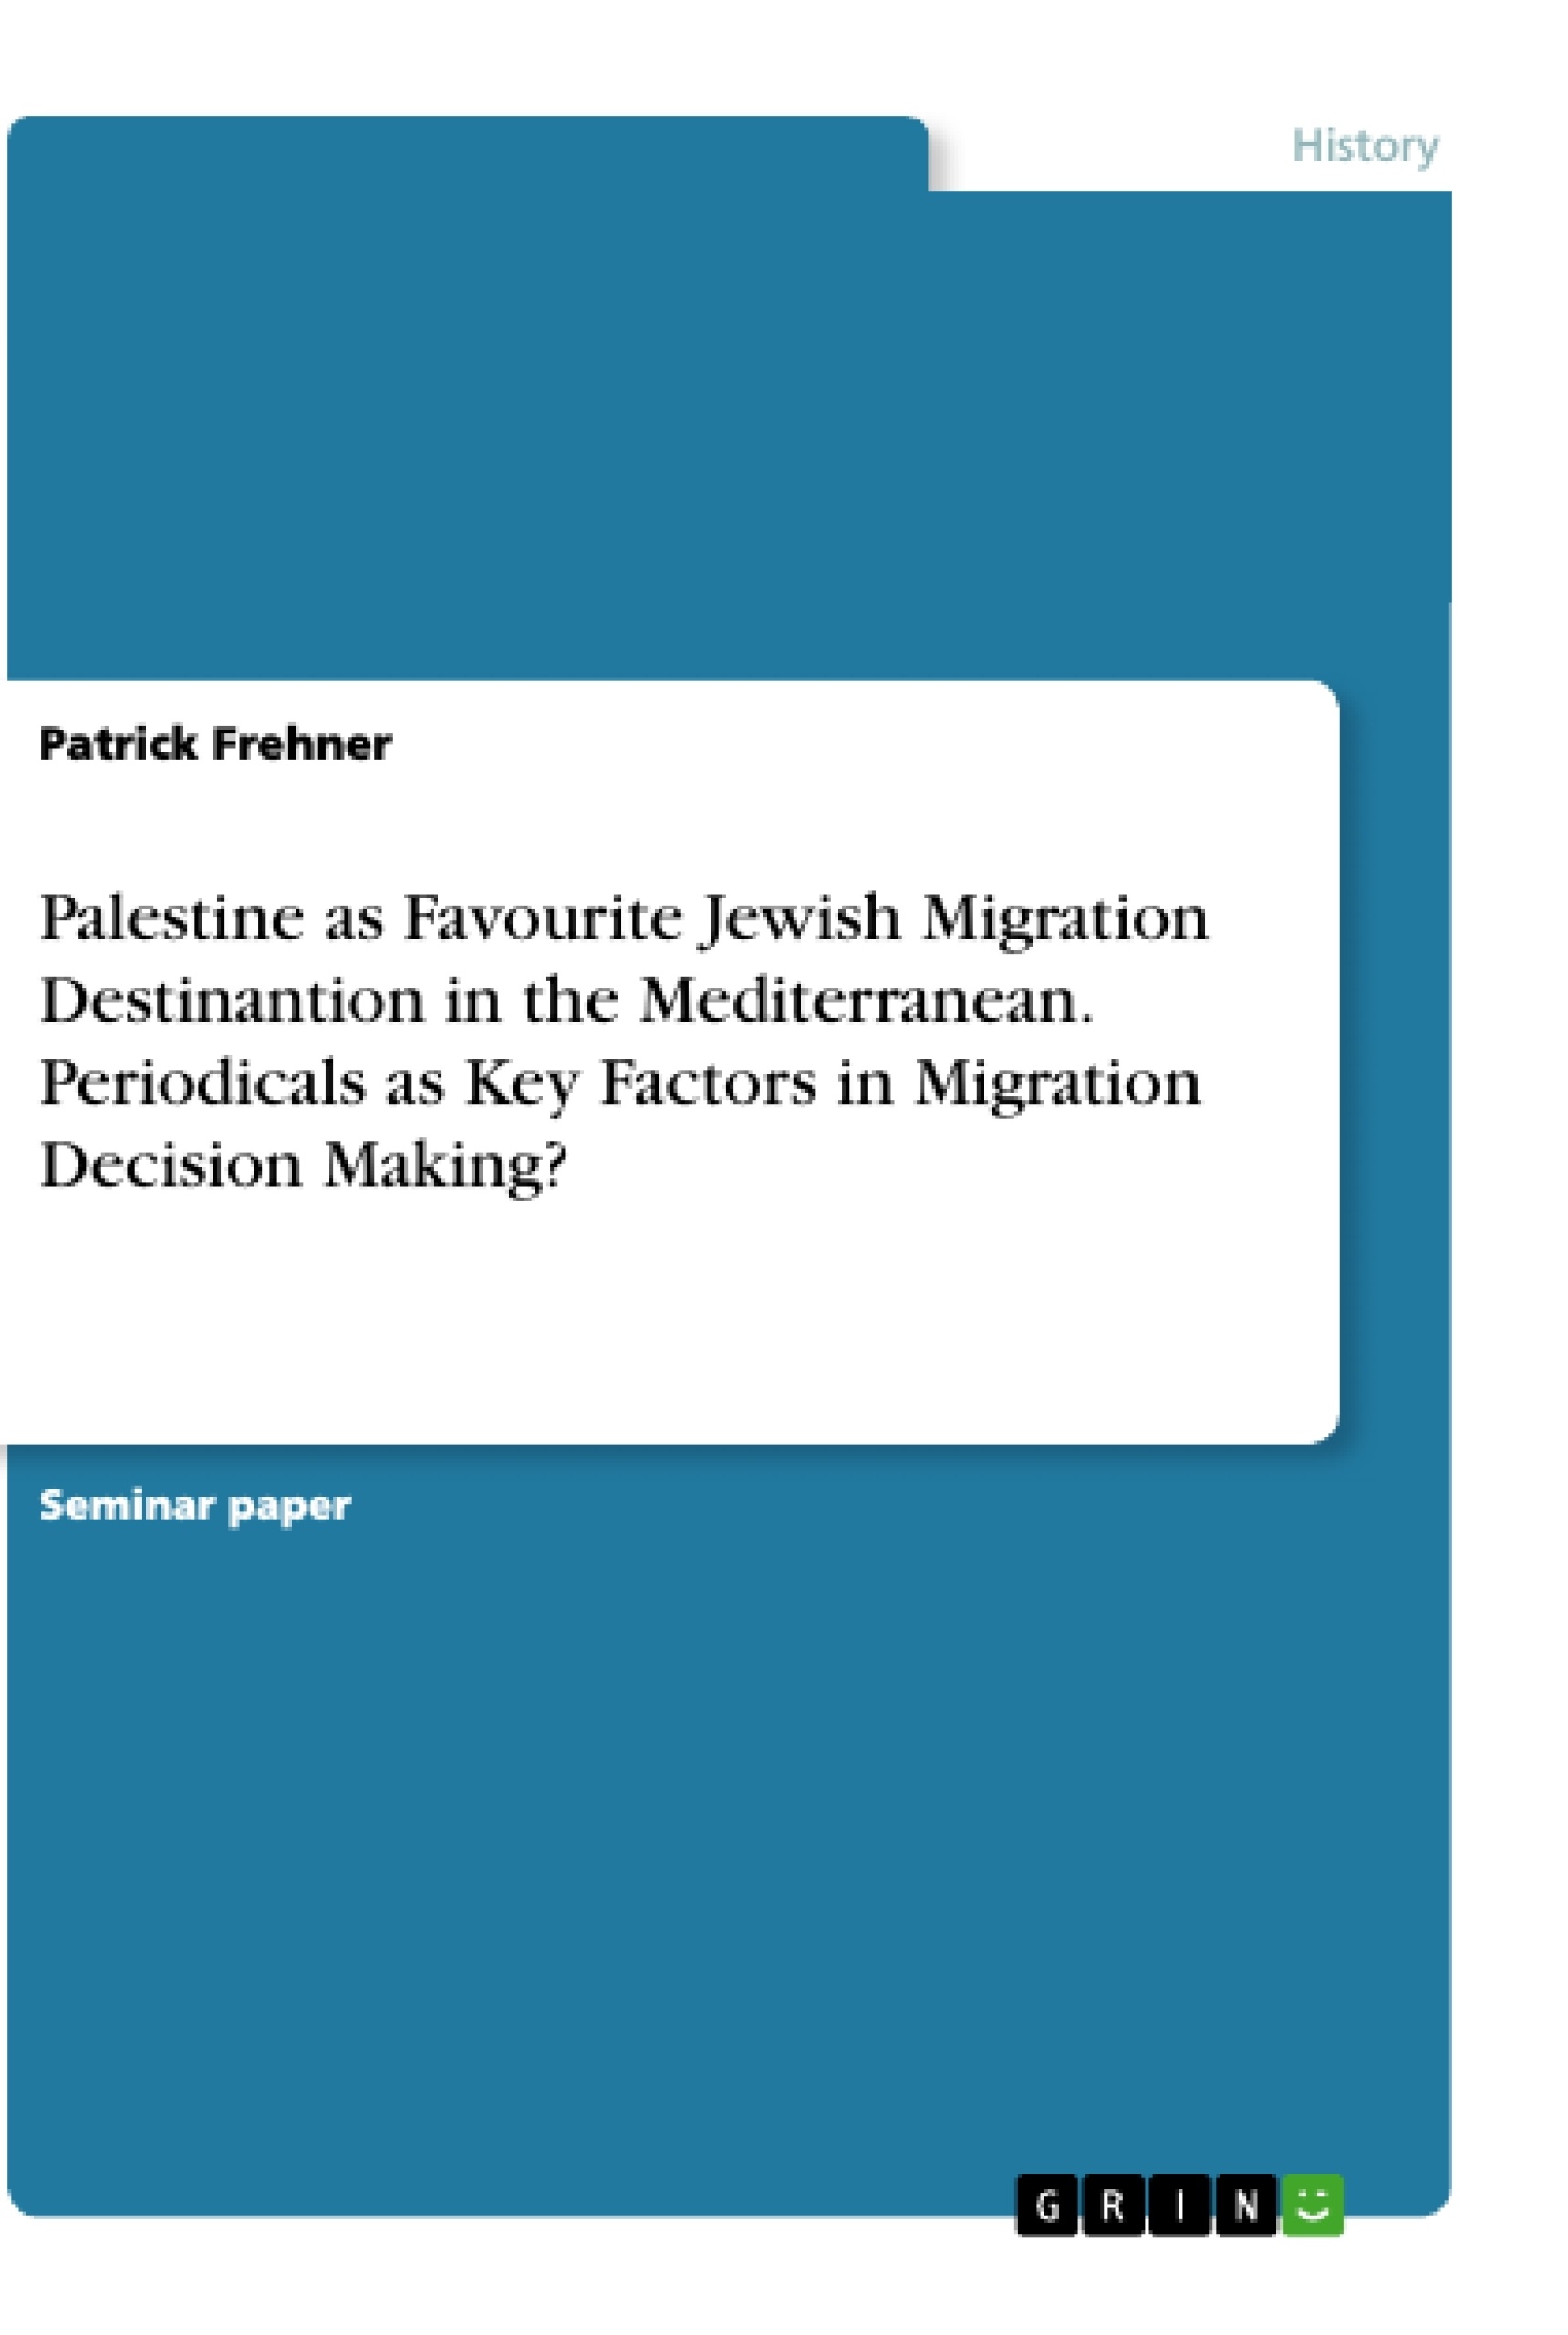 Title: Palestine as Favourite Jewish Migration Destinantion in the Mediterranean. Periodicals as Key Factors in Migration Decision Making?